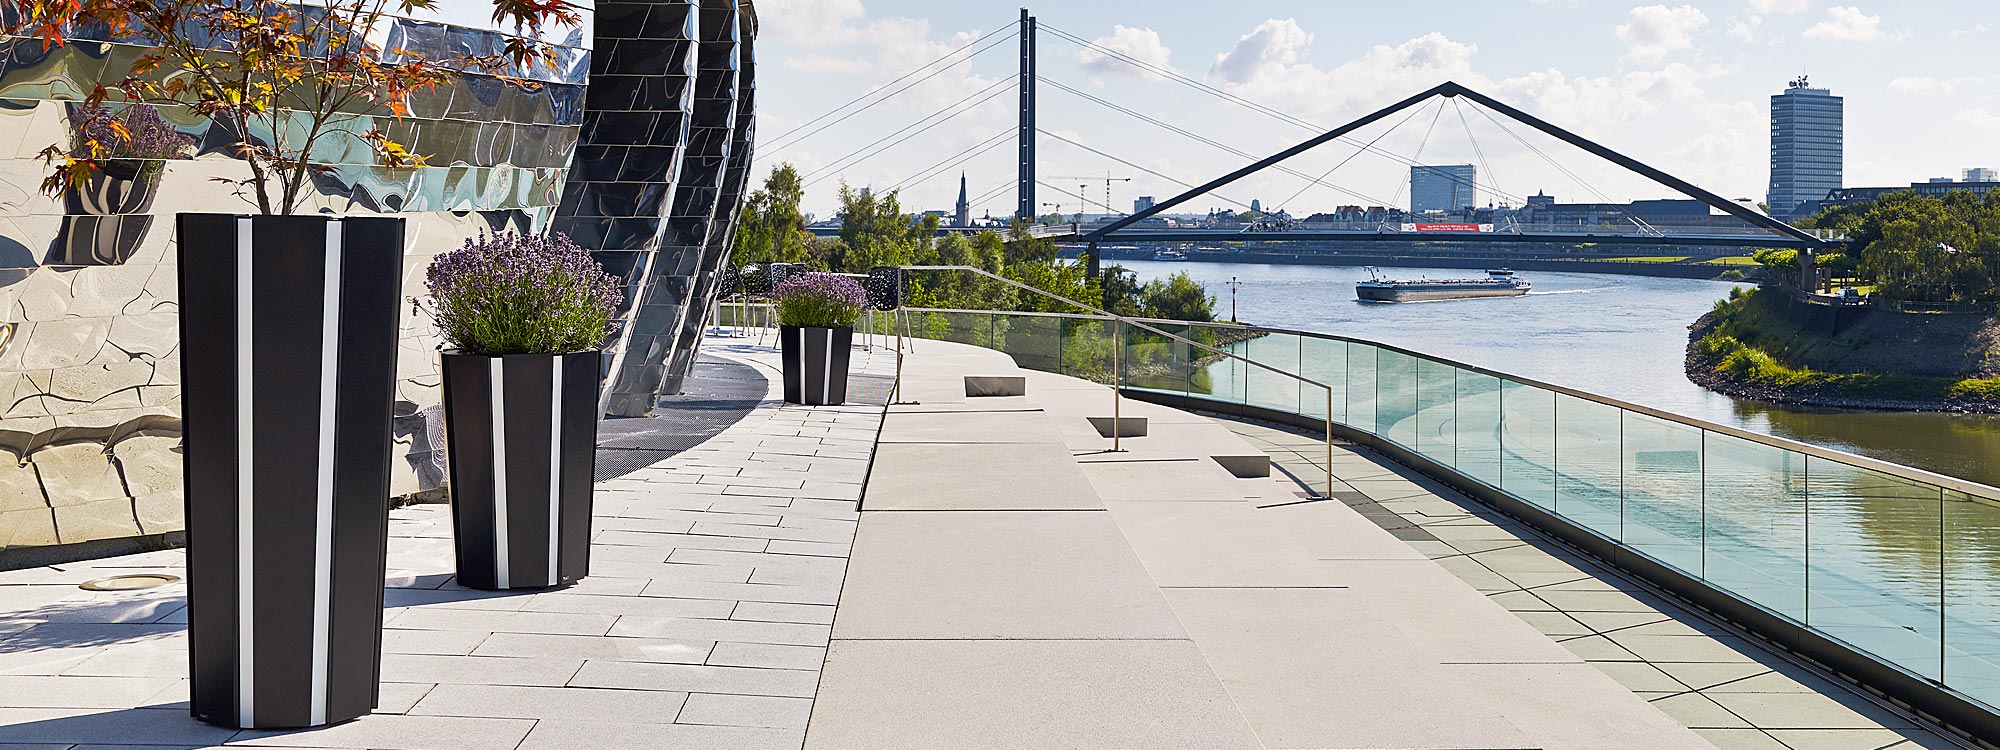 Image of Flora Octa large outdoor planters on sunny terrace overlooking a bridge & large river in Germany